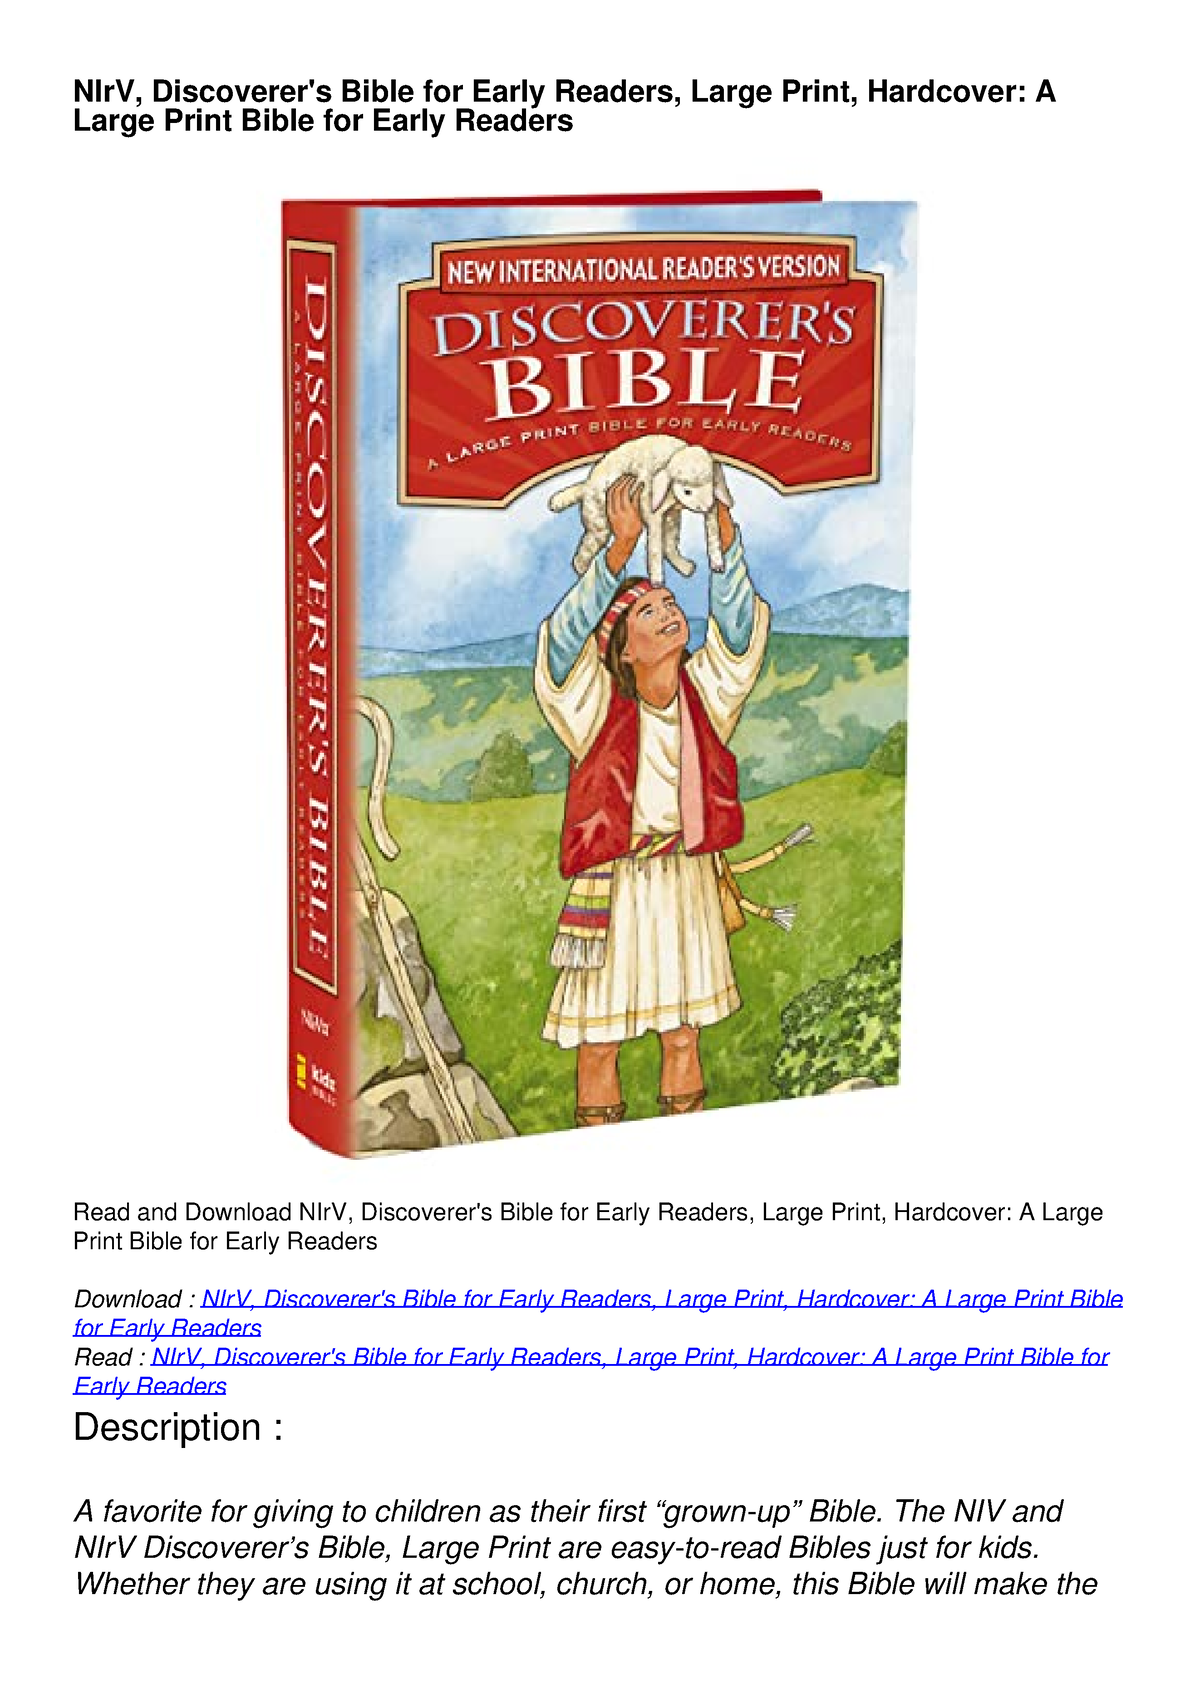 read-pdf-nirv-discoverer-s-bible-for-early-readers-large-print